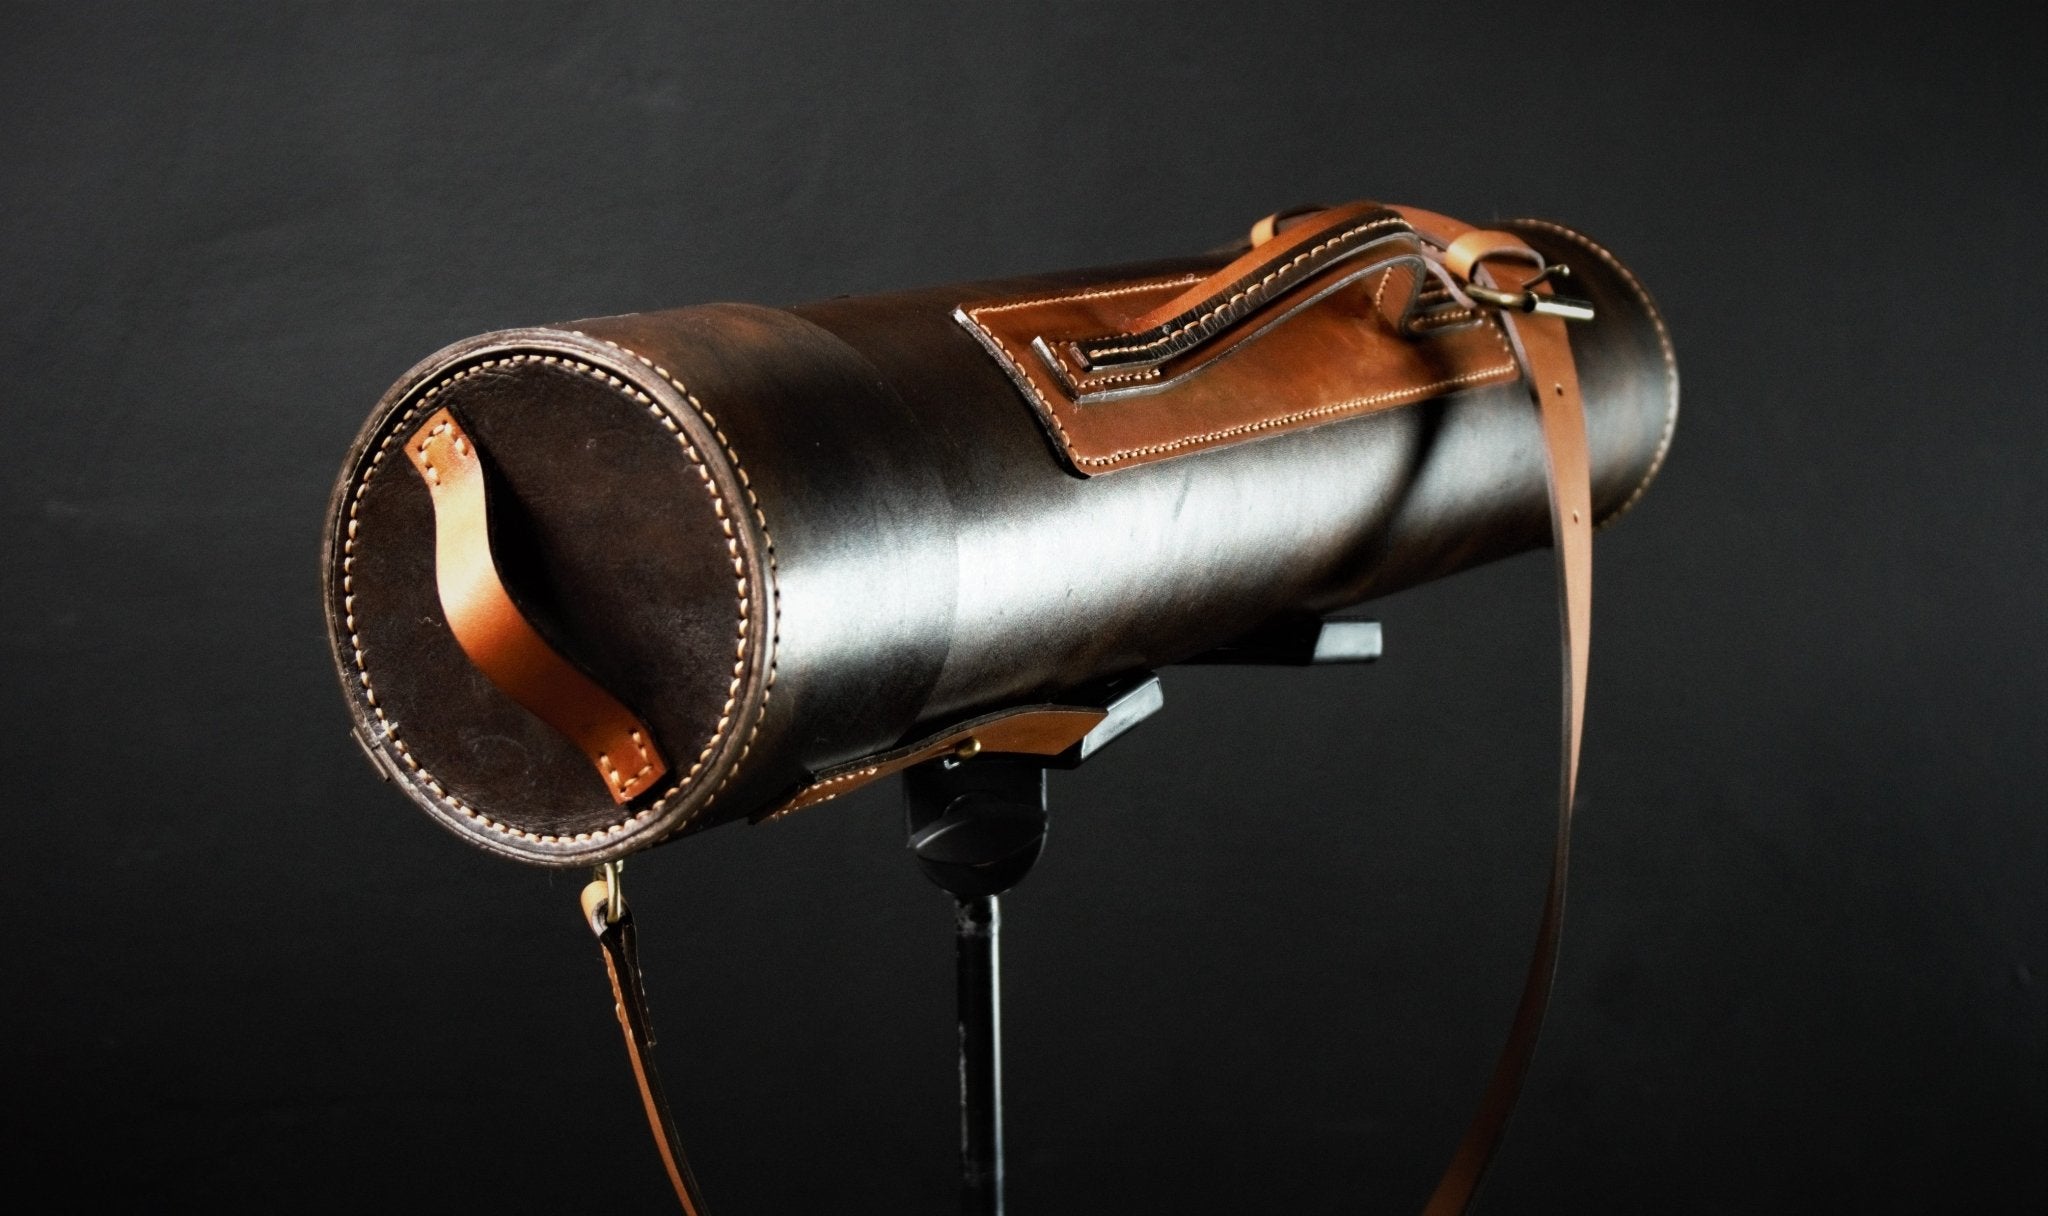 Leather Map Case the blueprint Tube a Leather Tube for Blueprints, Posters,  Maps, and Artwork 